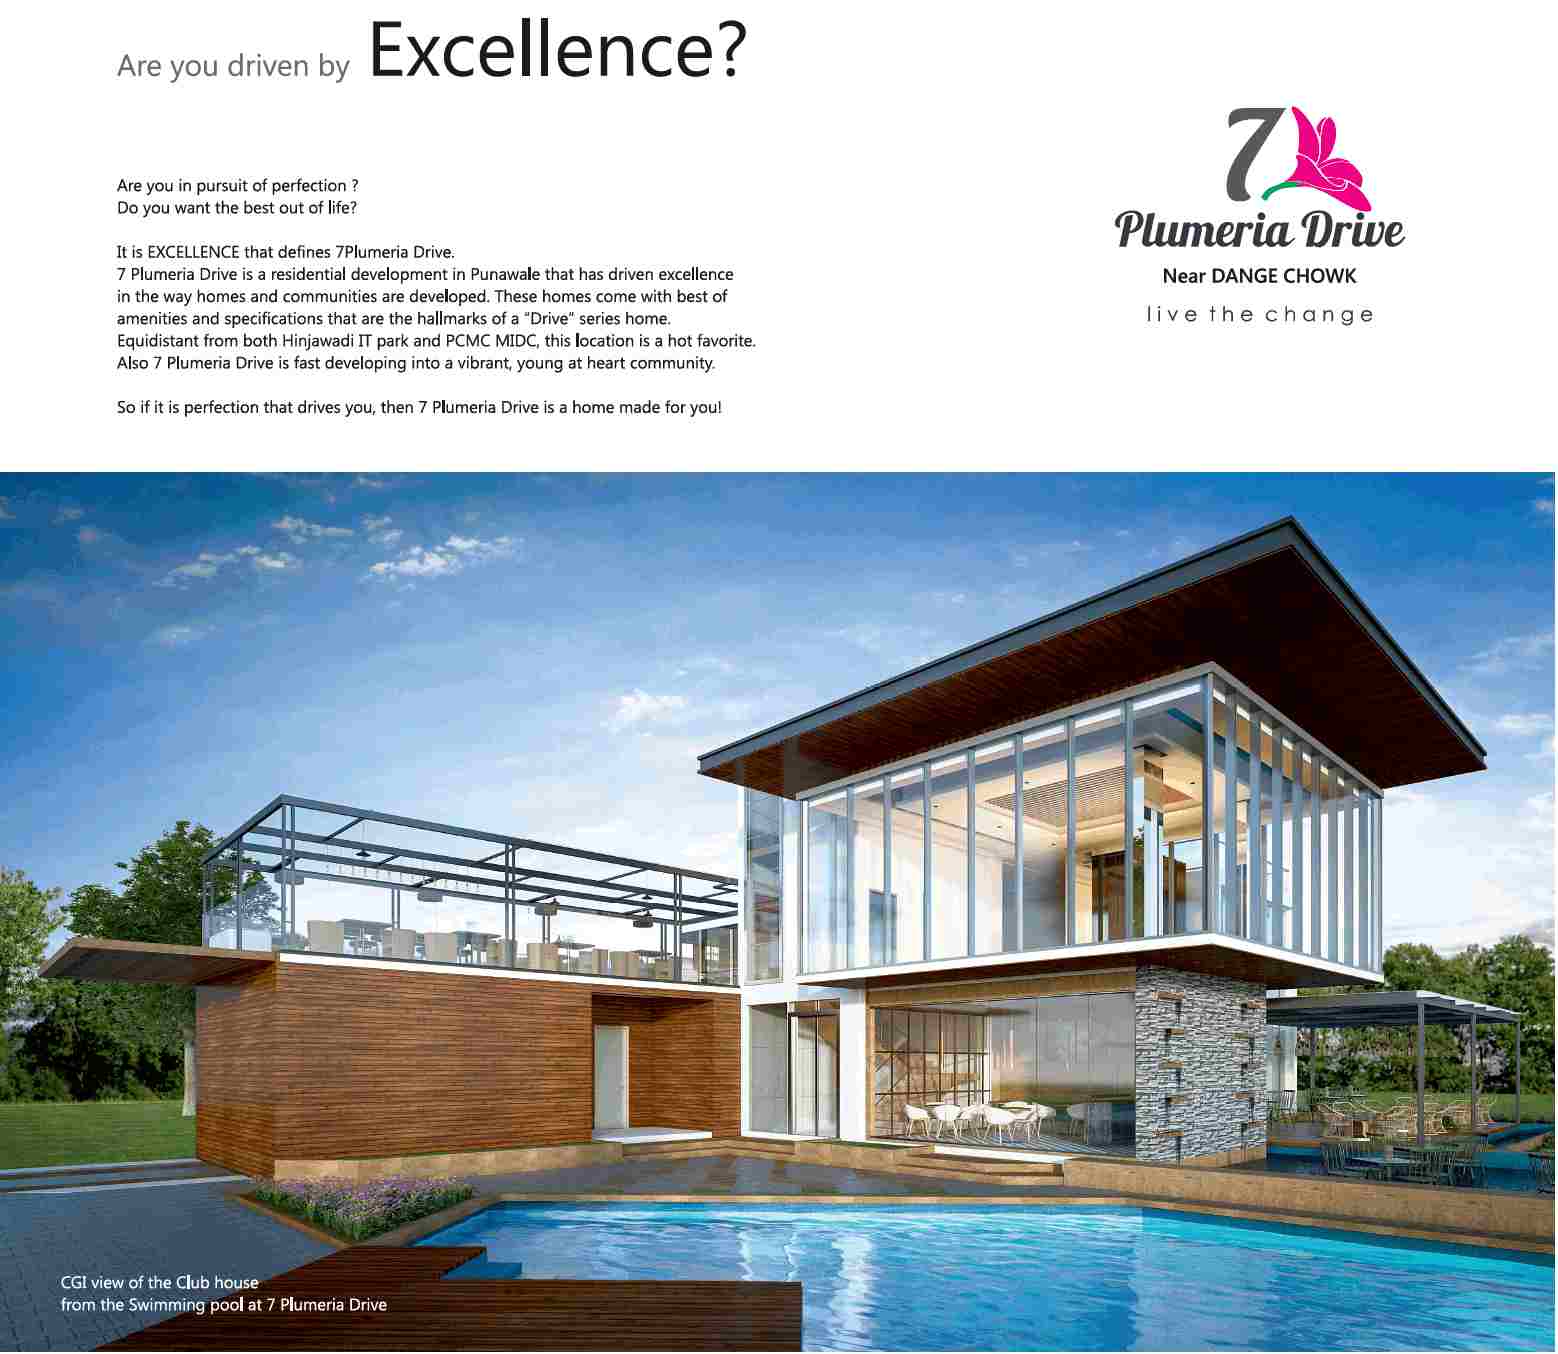 Get driven by excellence at Bhandari 7 Plumeria Drive in Pune